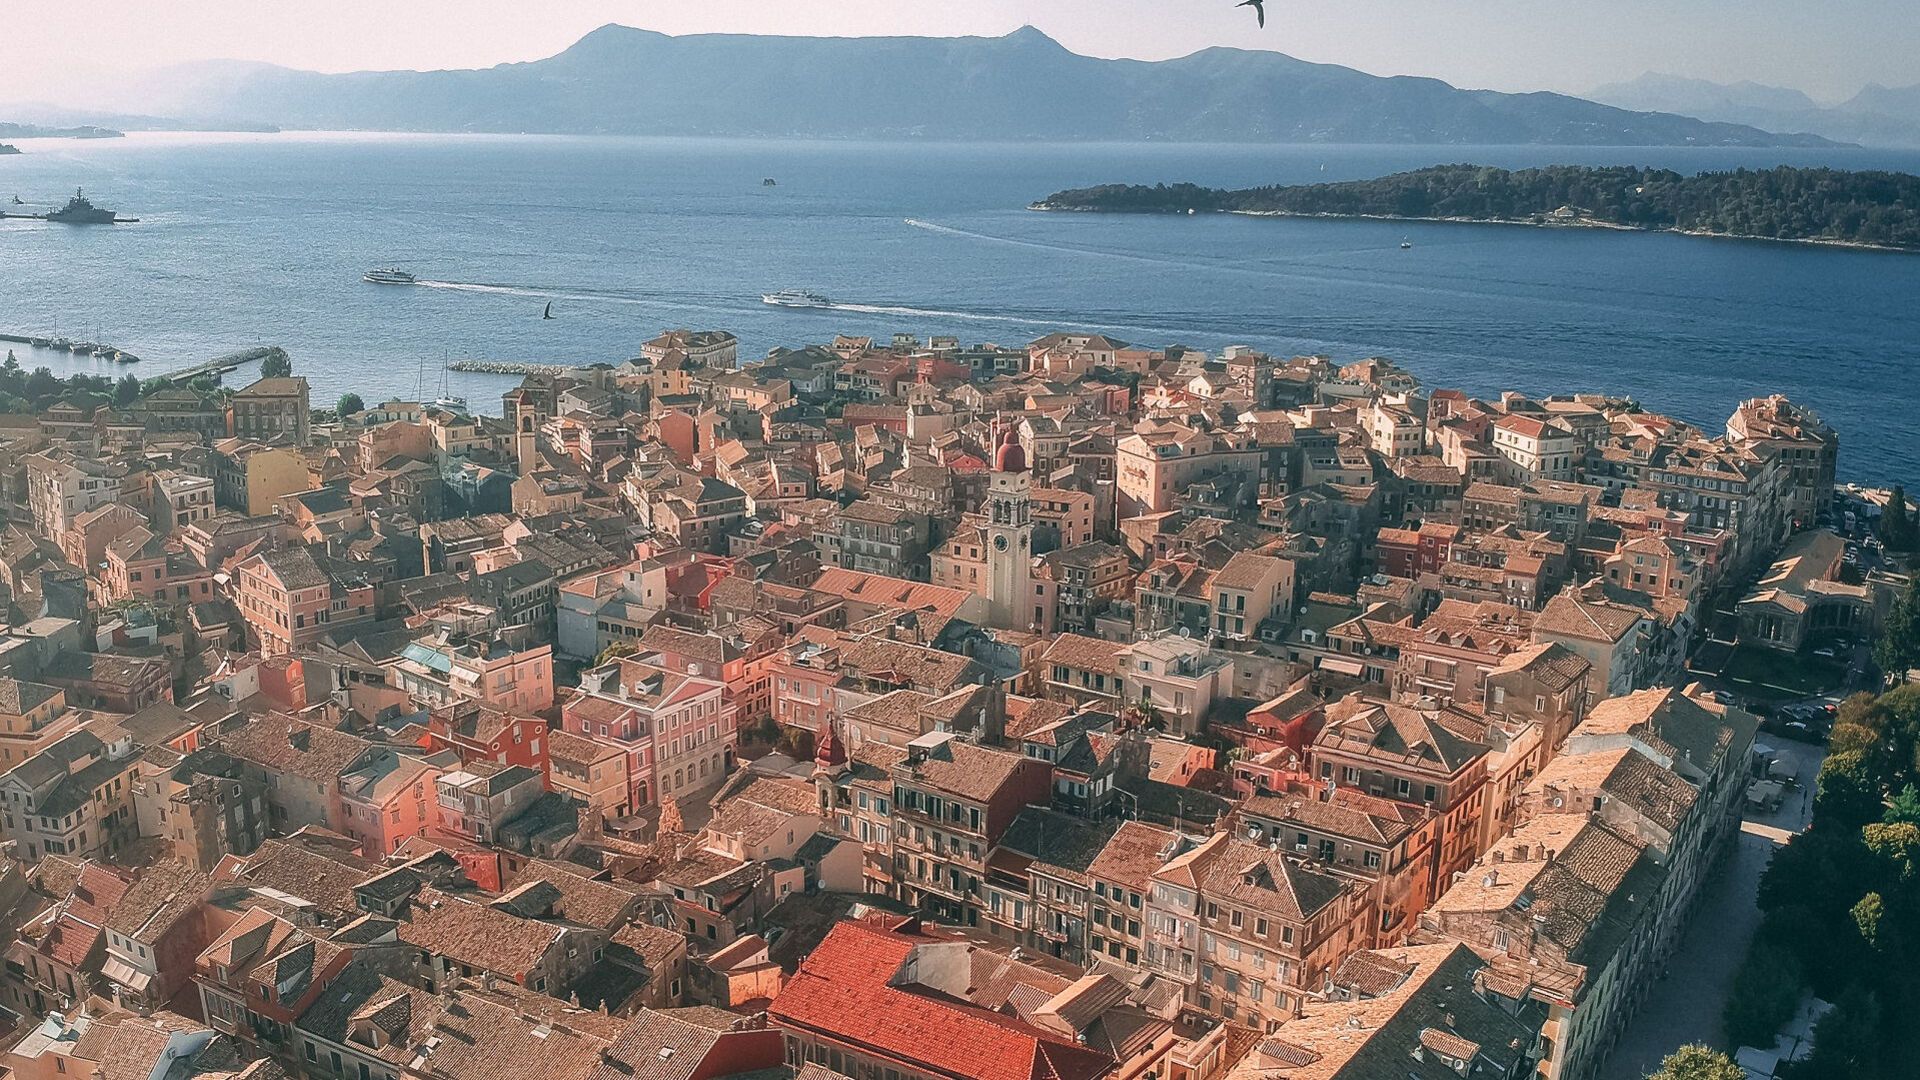 Aerial view of Corfu Old Town, Greece